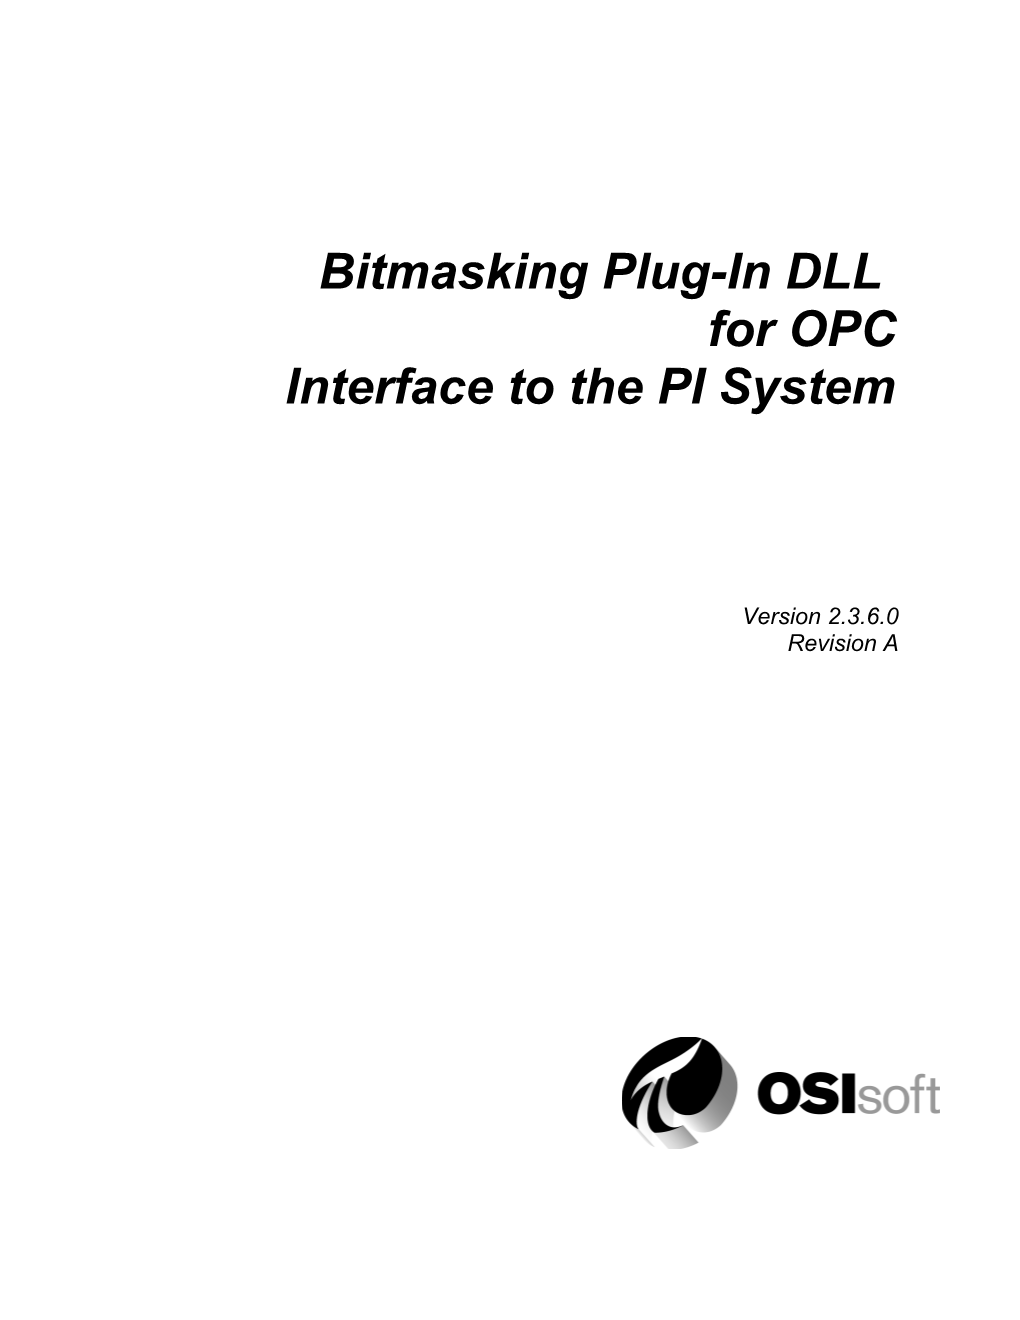 Bitmasking Plug-In DLL for OPC Interface to the PI System s1